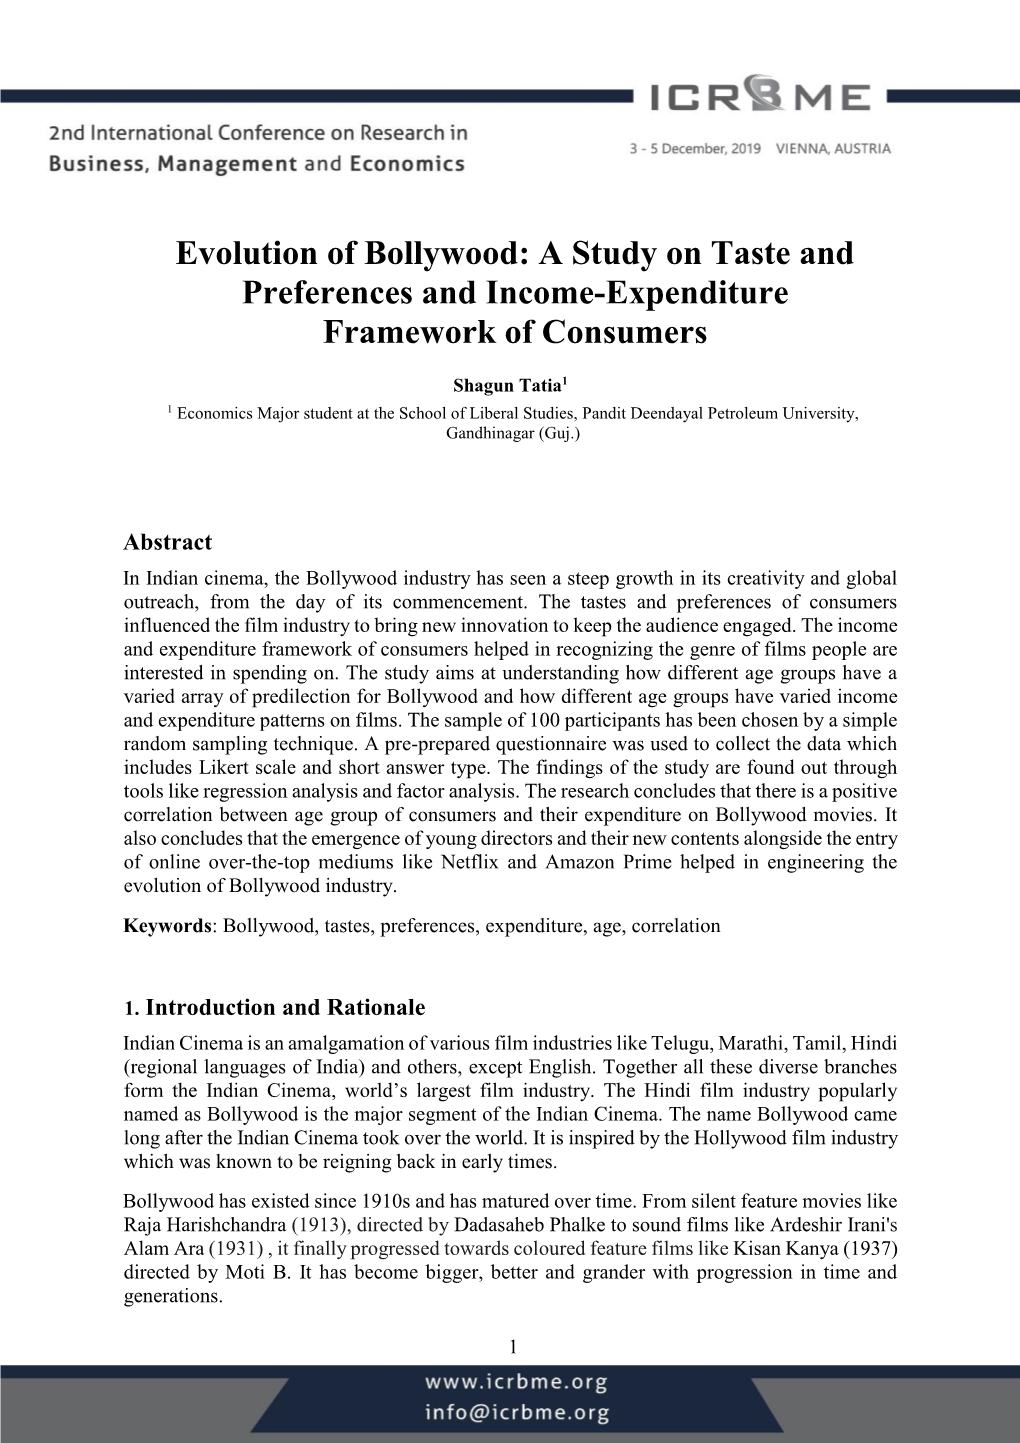 Evolution of Bollywood: a Study on Taste and Preferences and Income-Expenditure Framework of Consumers